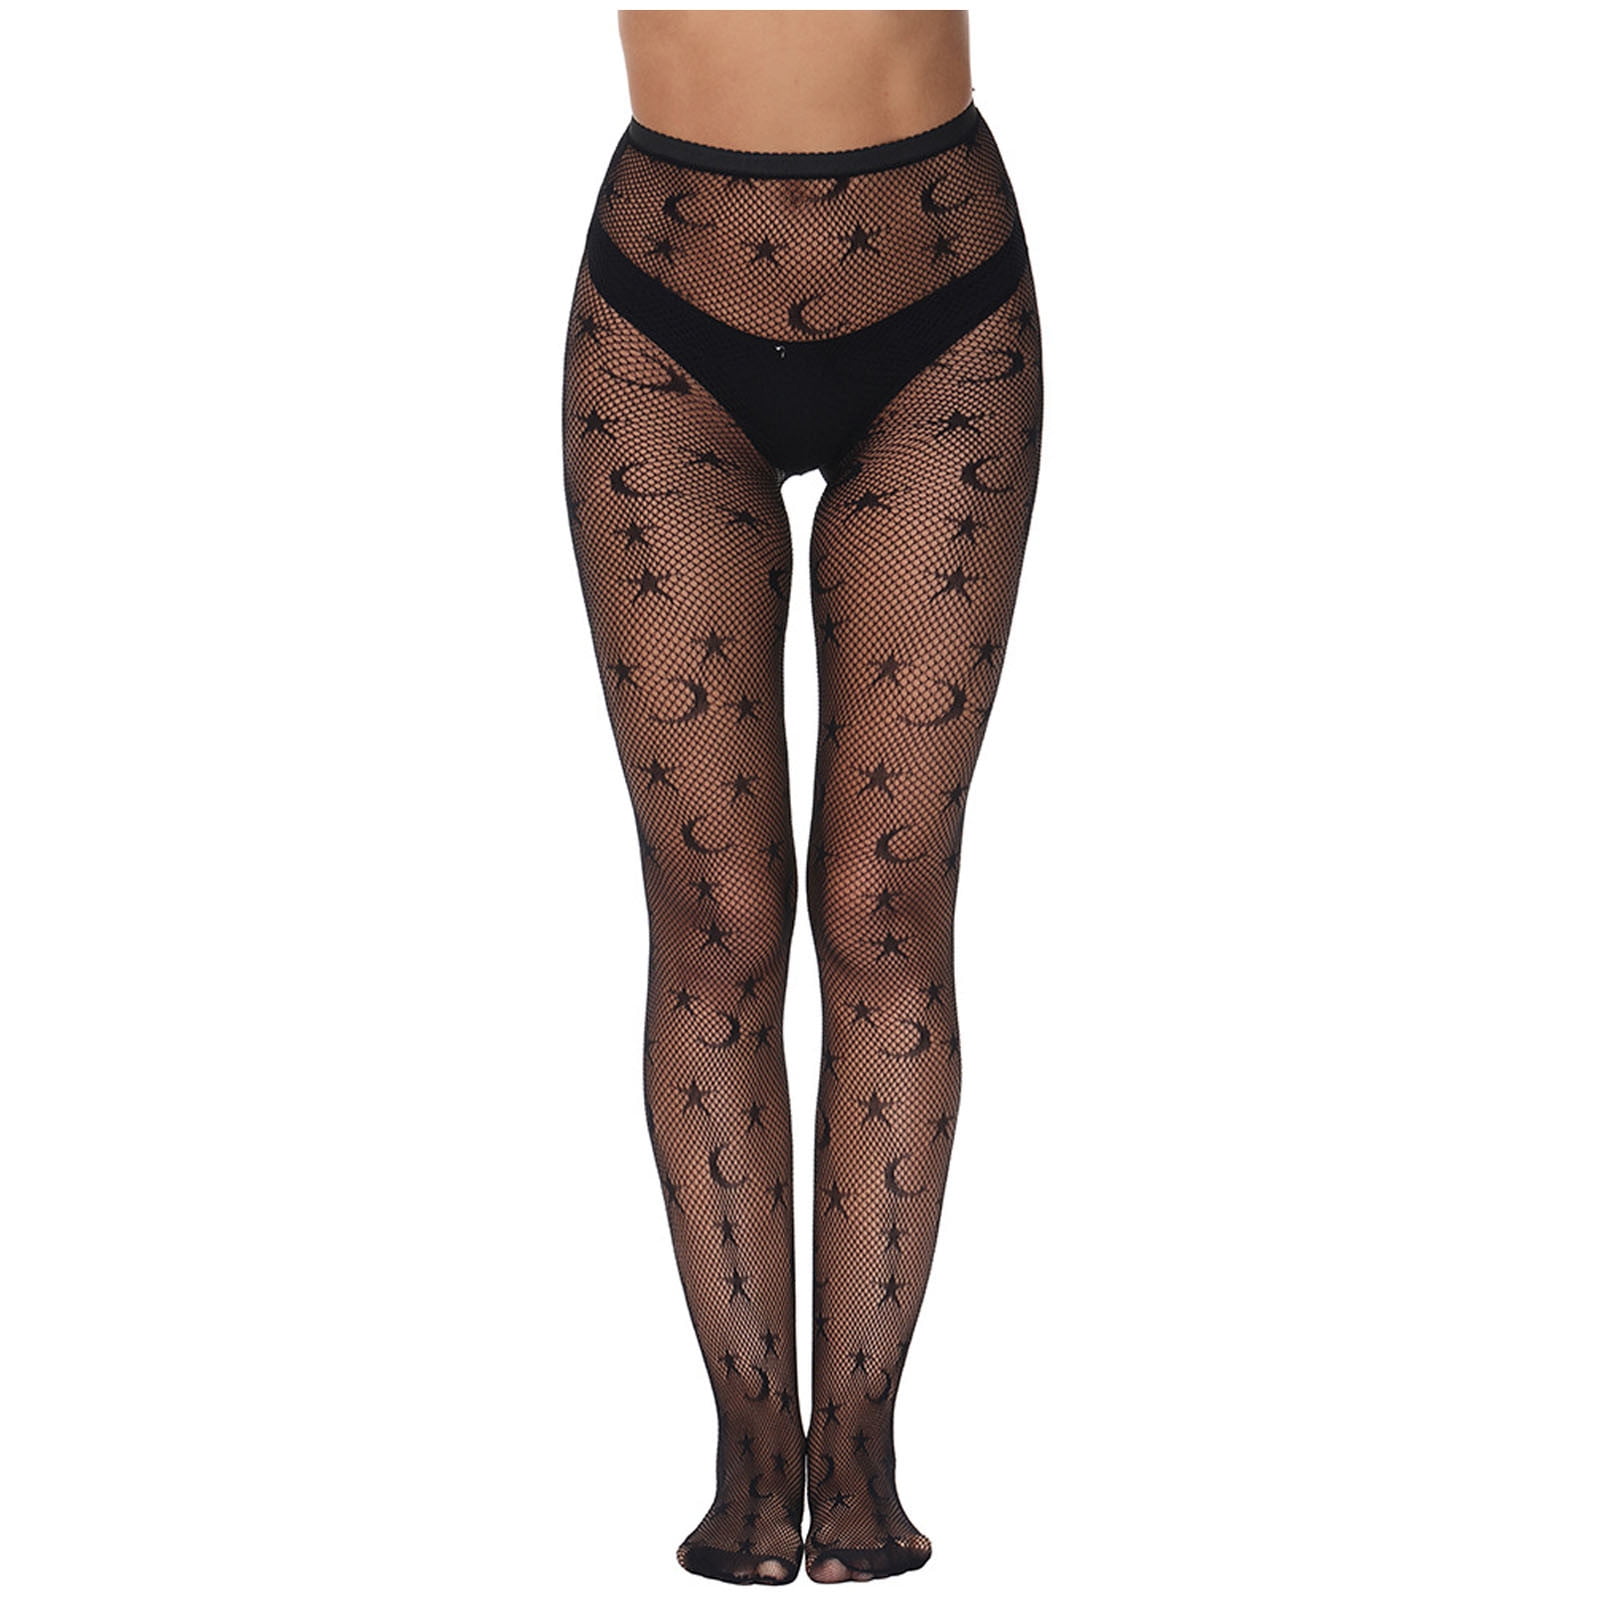 Charmdays Patterned Tights for Women Black Fishnet Stockings Lace